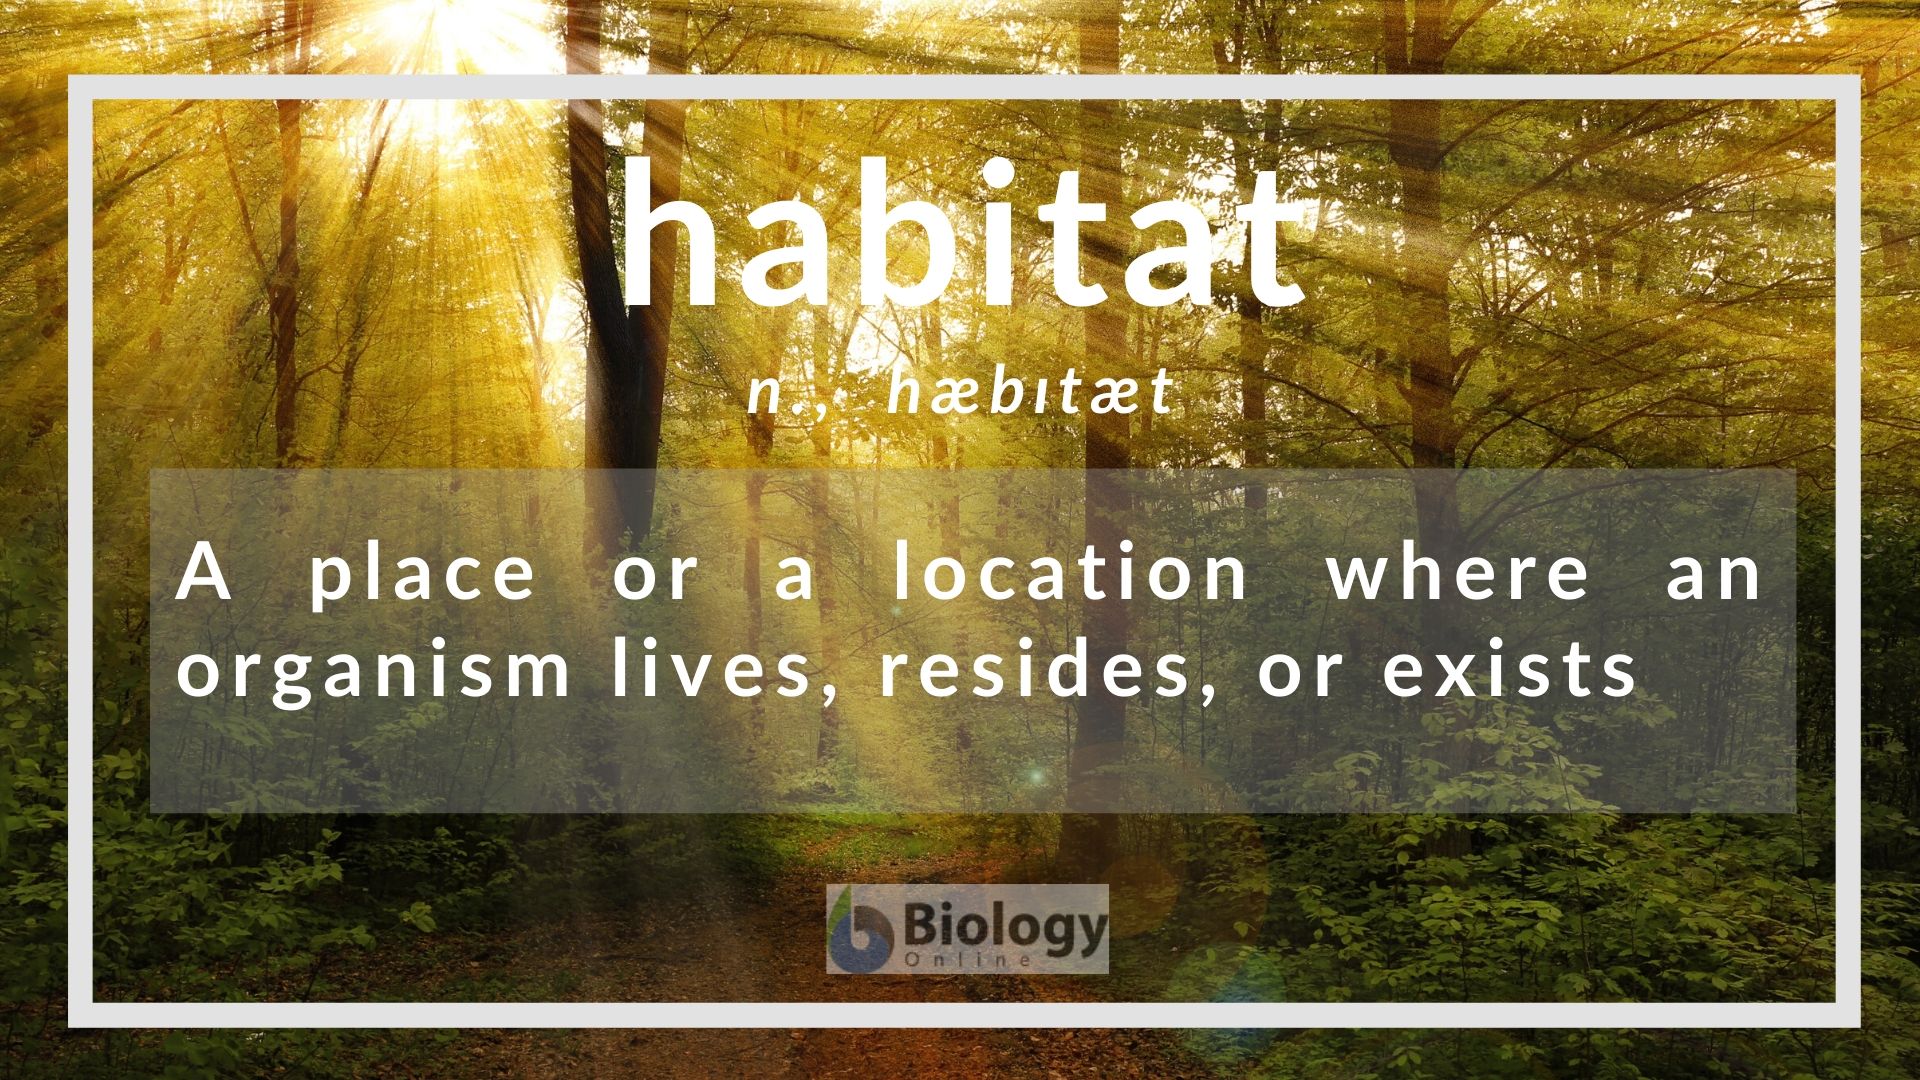 habitat-definition-and-examples-biology-online-dictionary